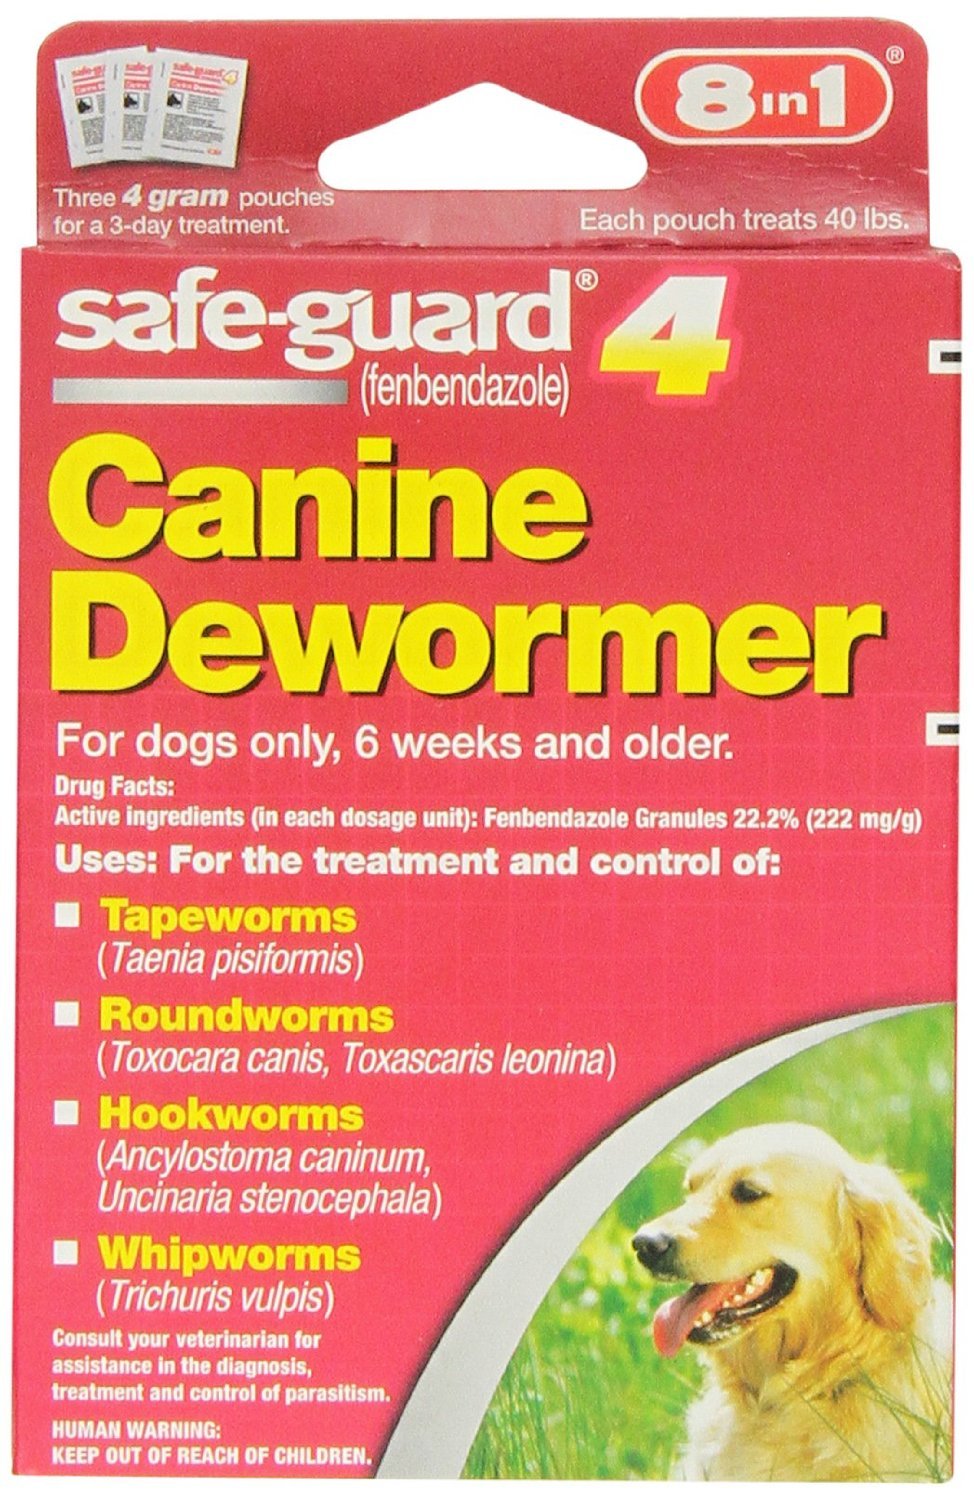 Excel 8in1 Safe-Guard Canine Dewormer for Large Dogs, 3 Day Treatment, Red, 40 lbs/pouch (J7164-1) - PawsPlanet Australia